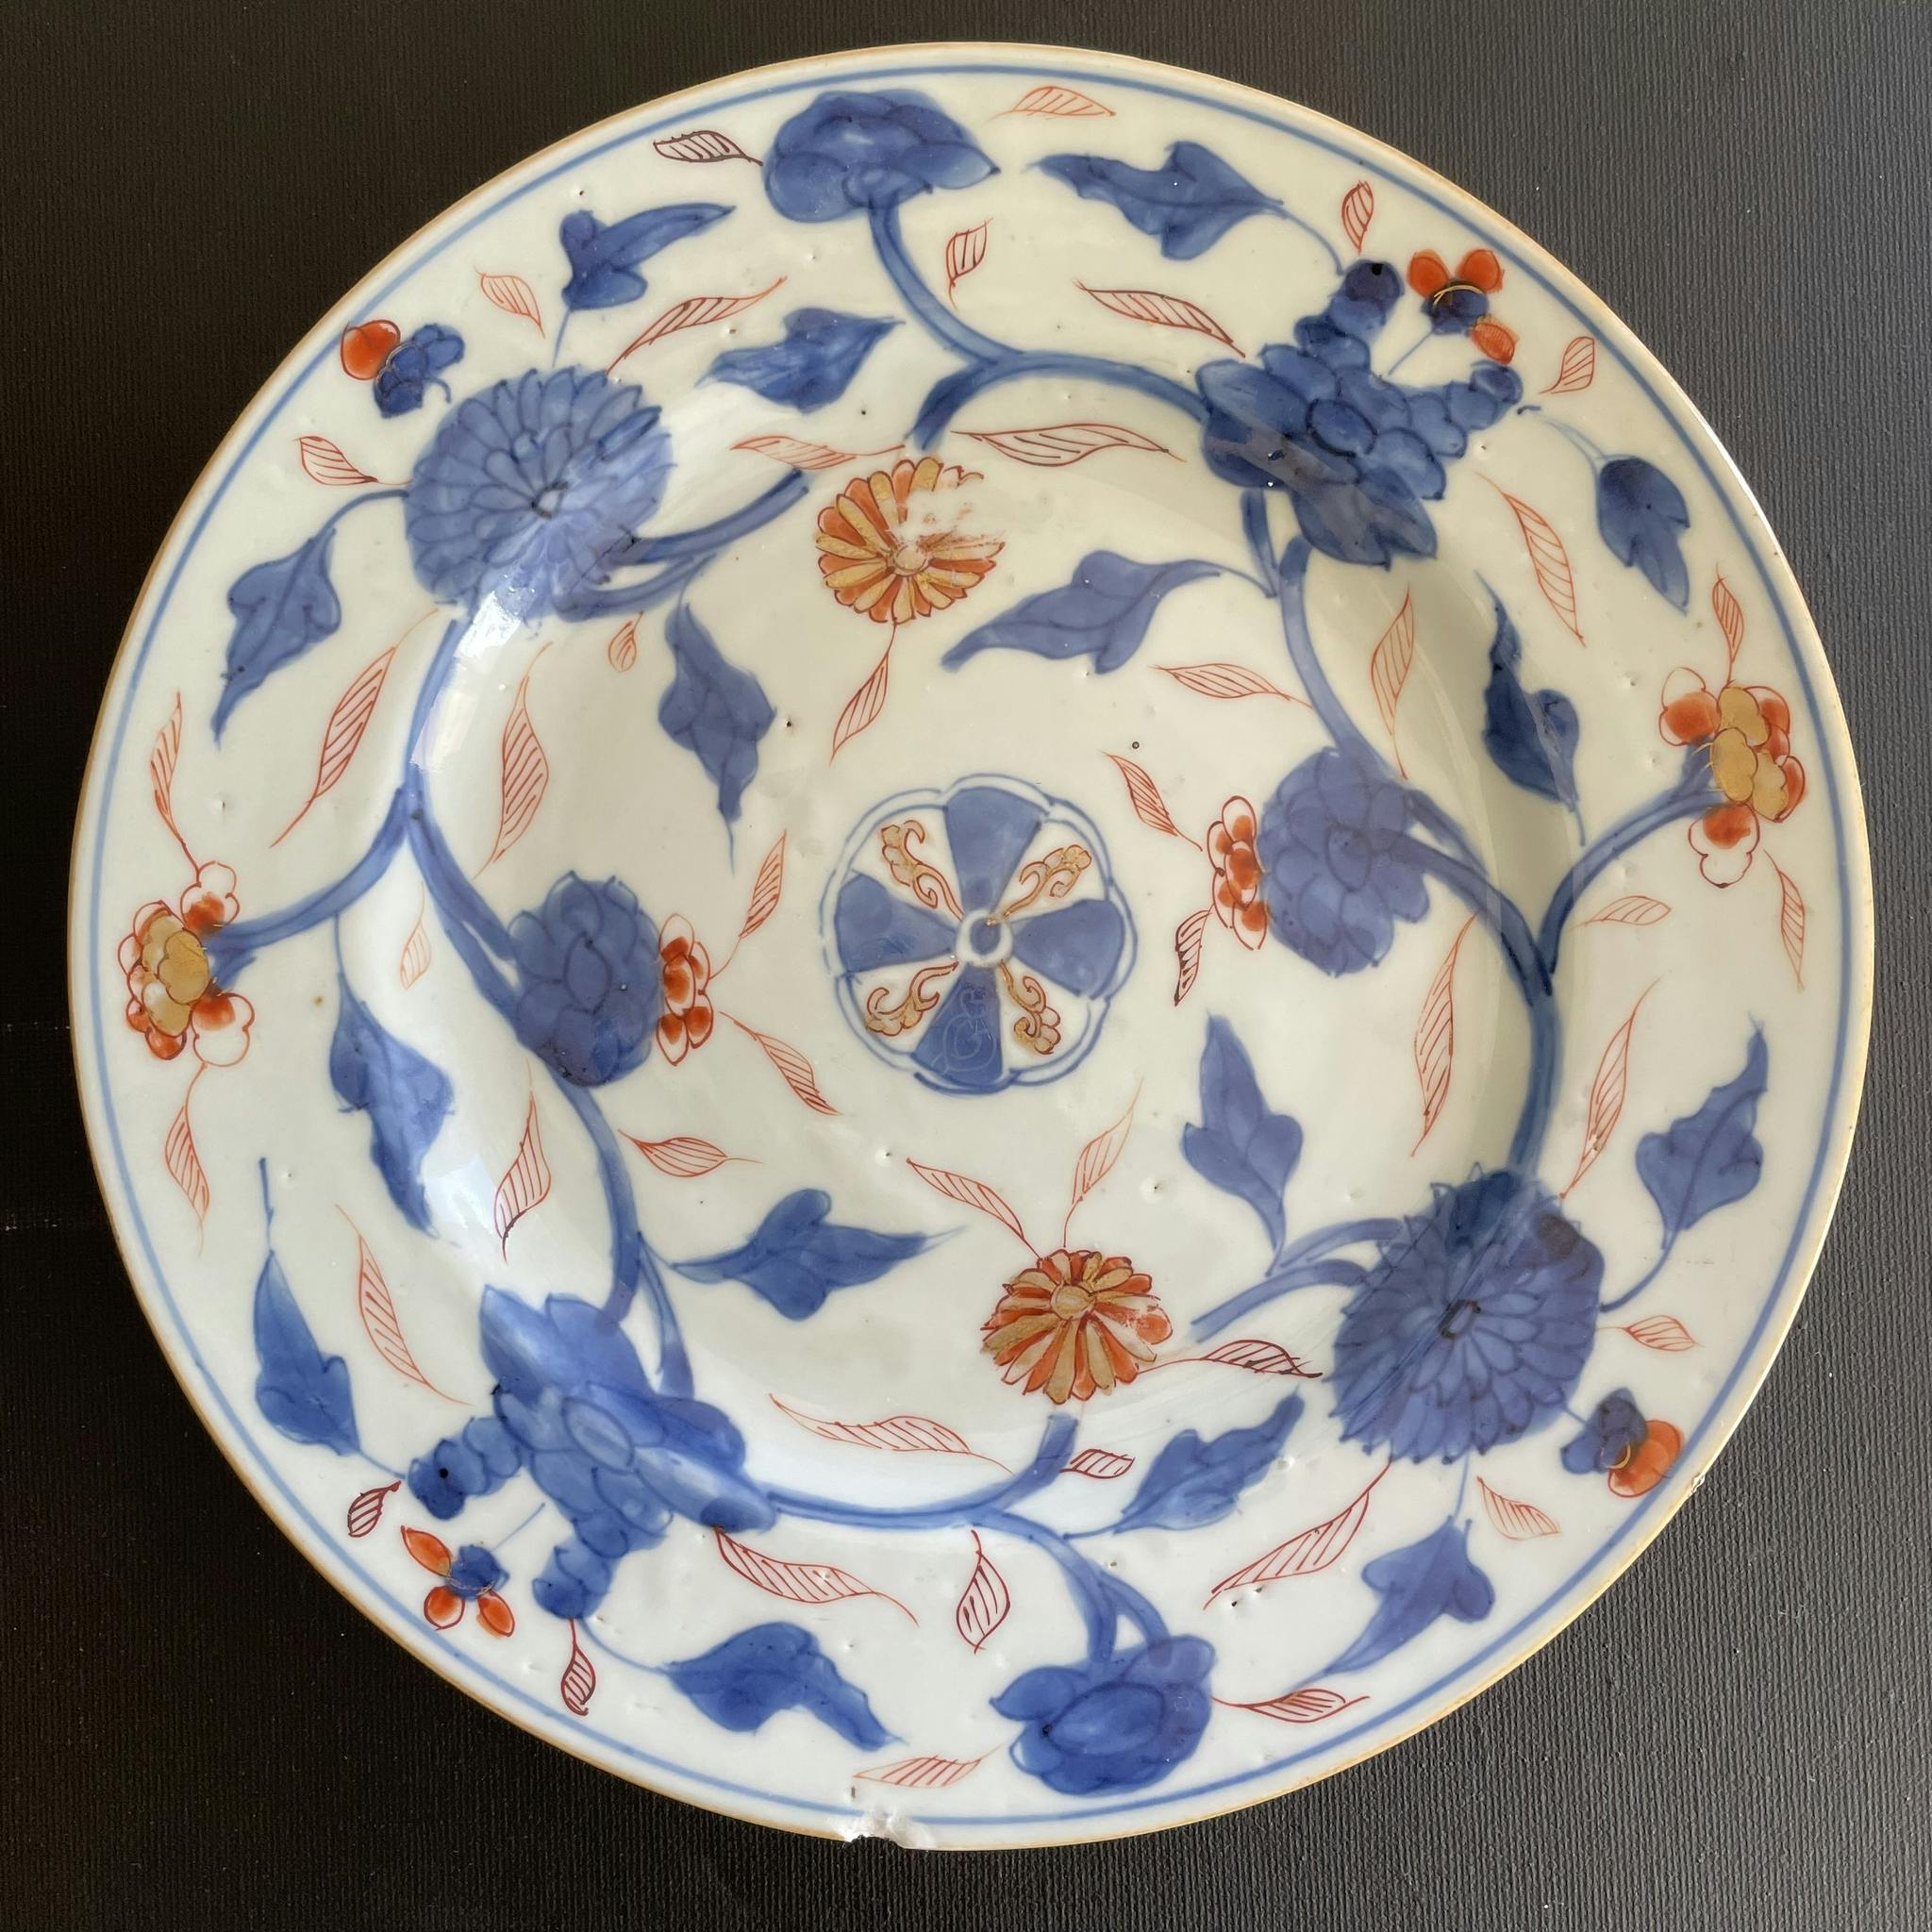 Antique Chinese imari plate, first half of the 18th c, Qing Dynasty #1450